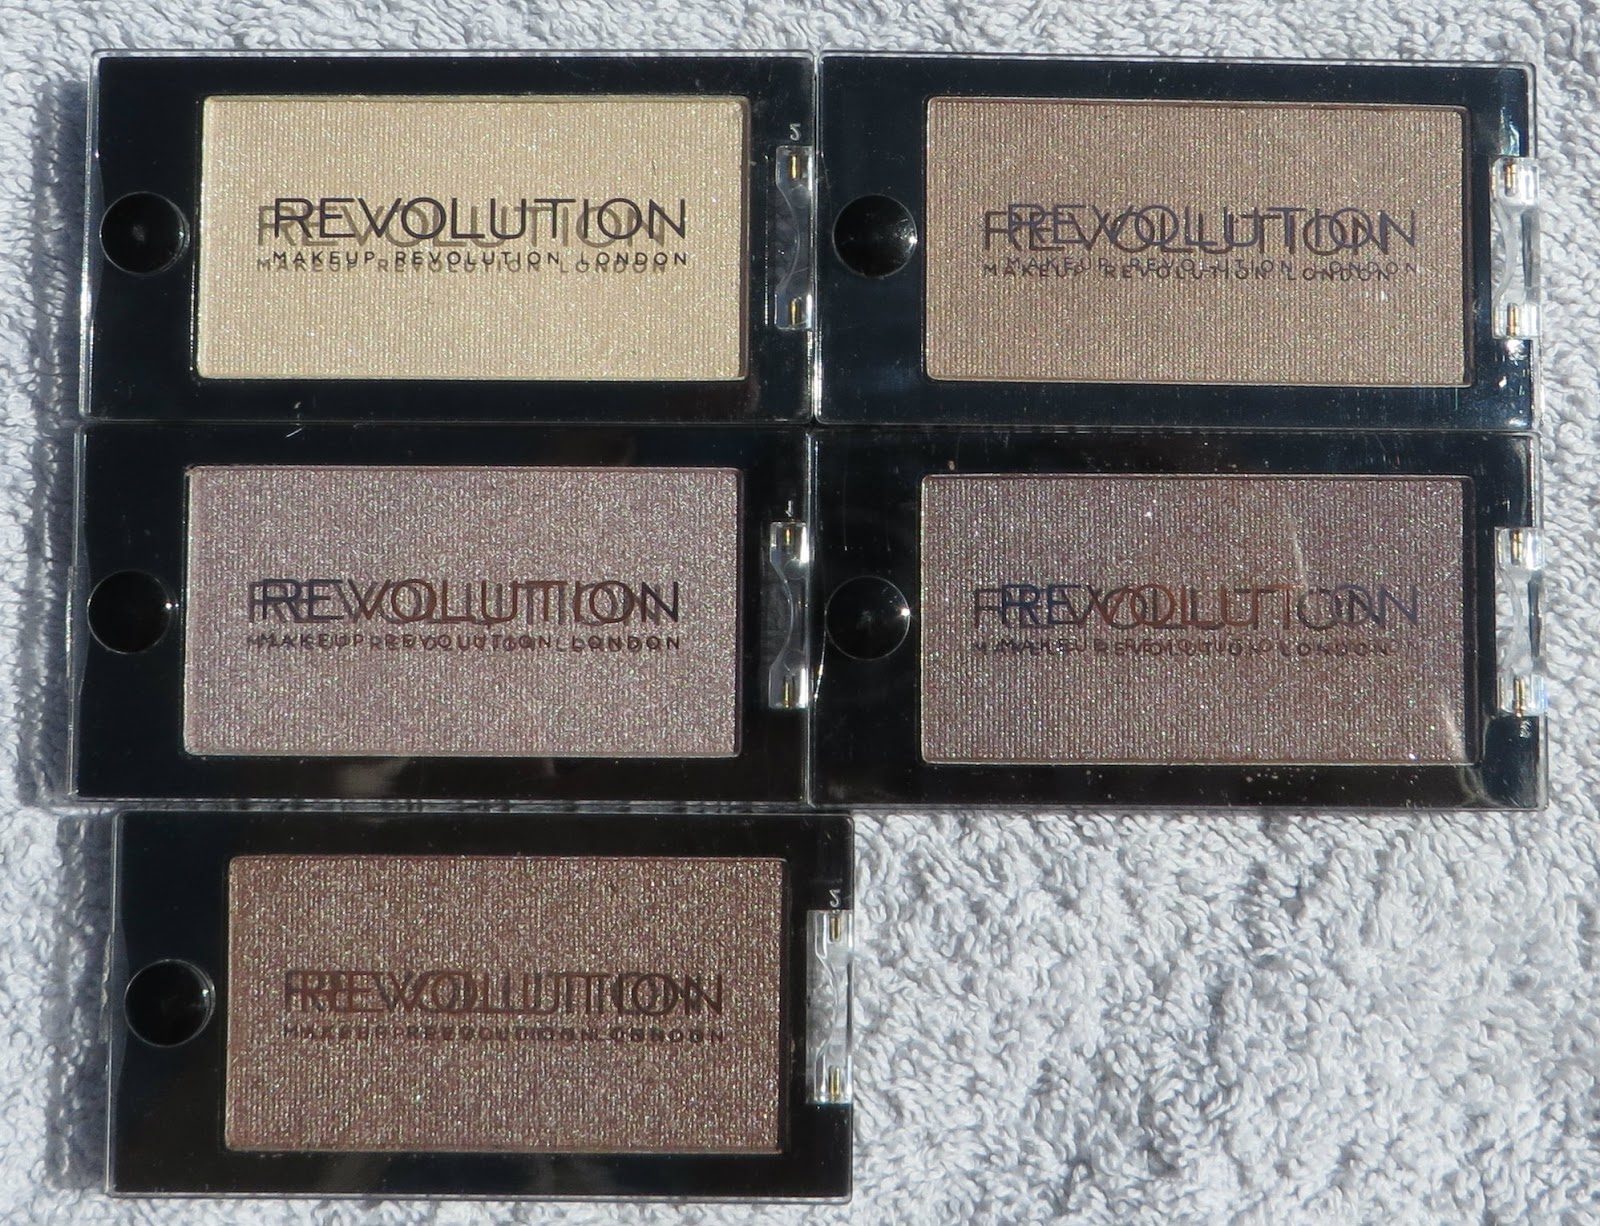 Where is makeup revolution sold on the map